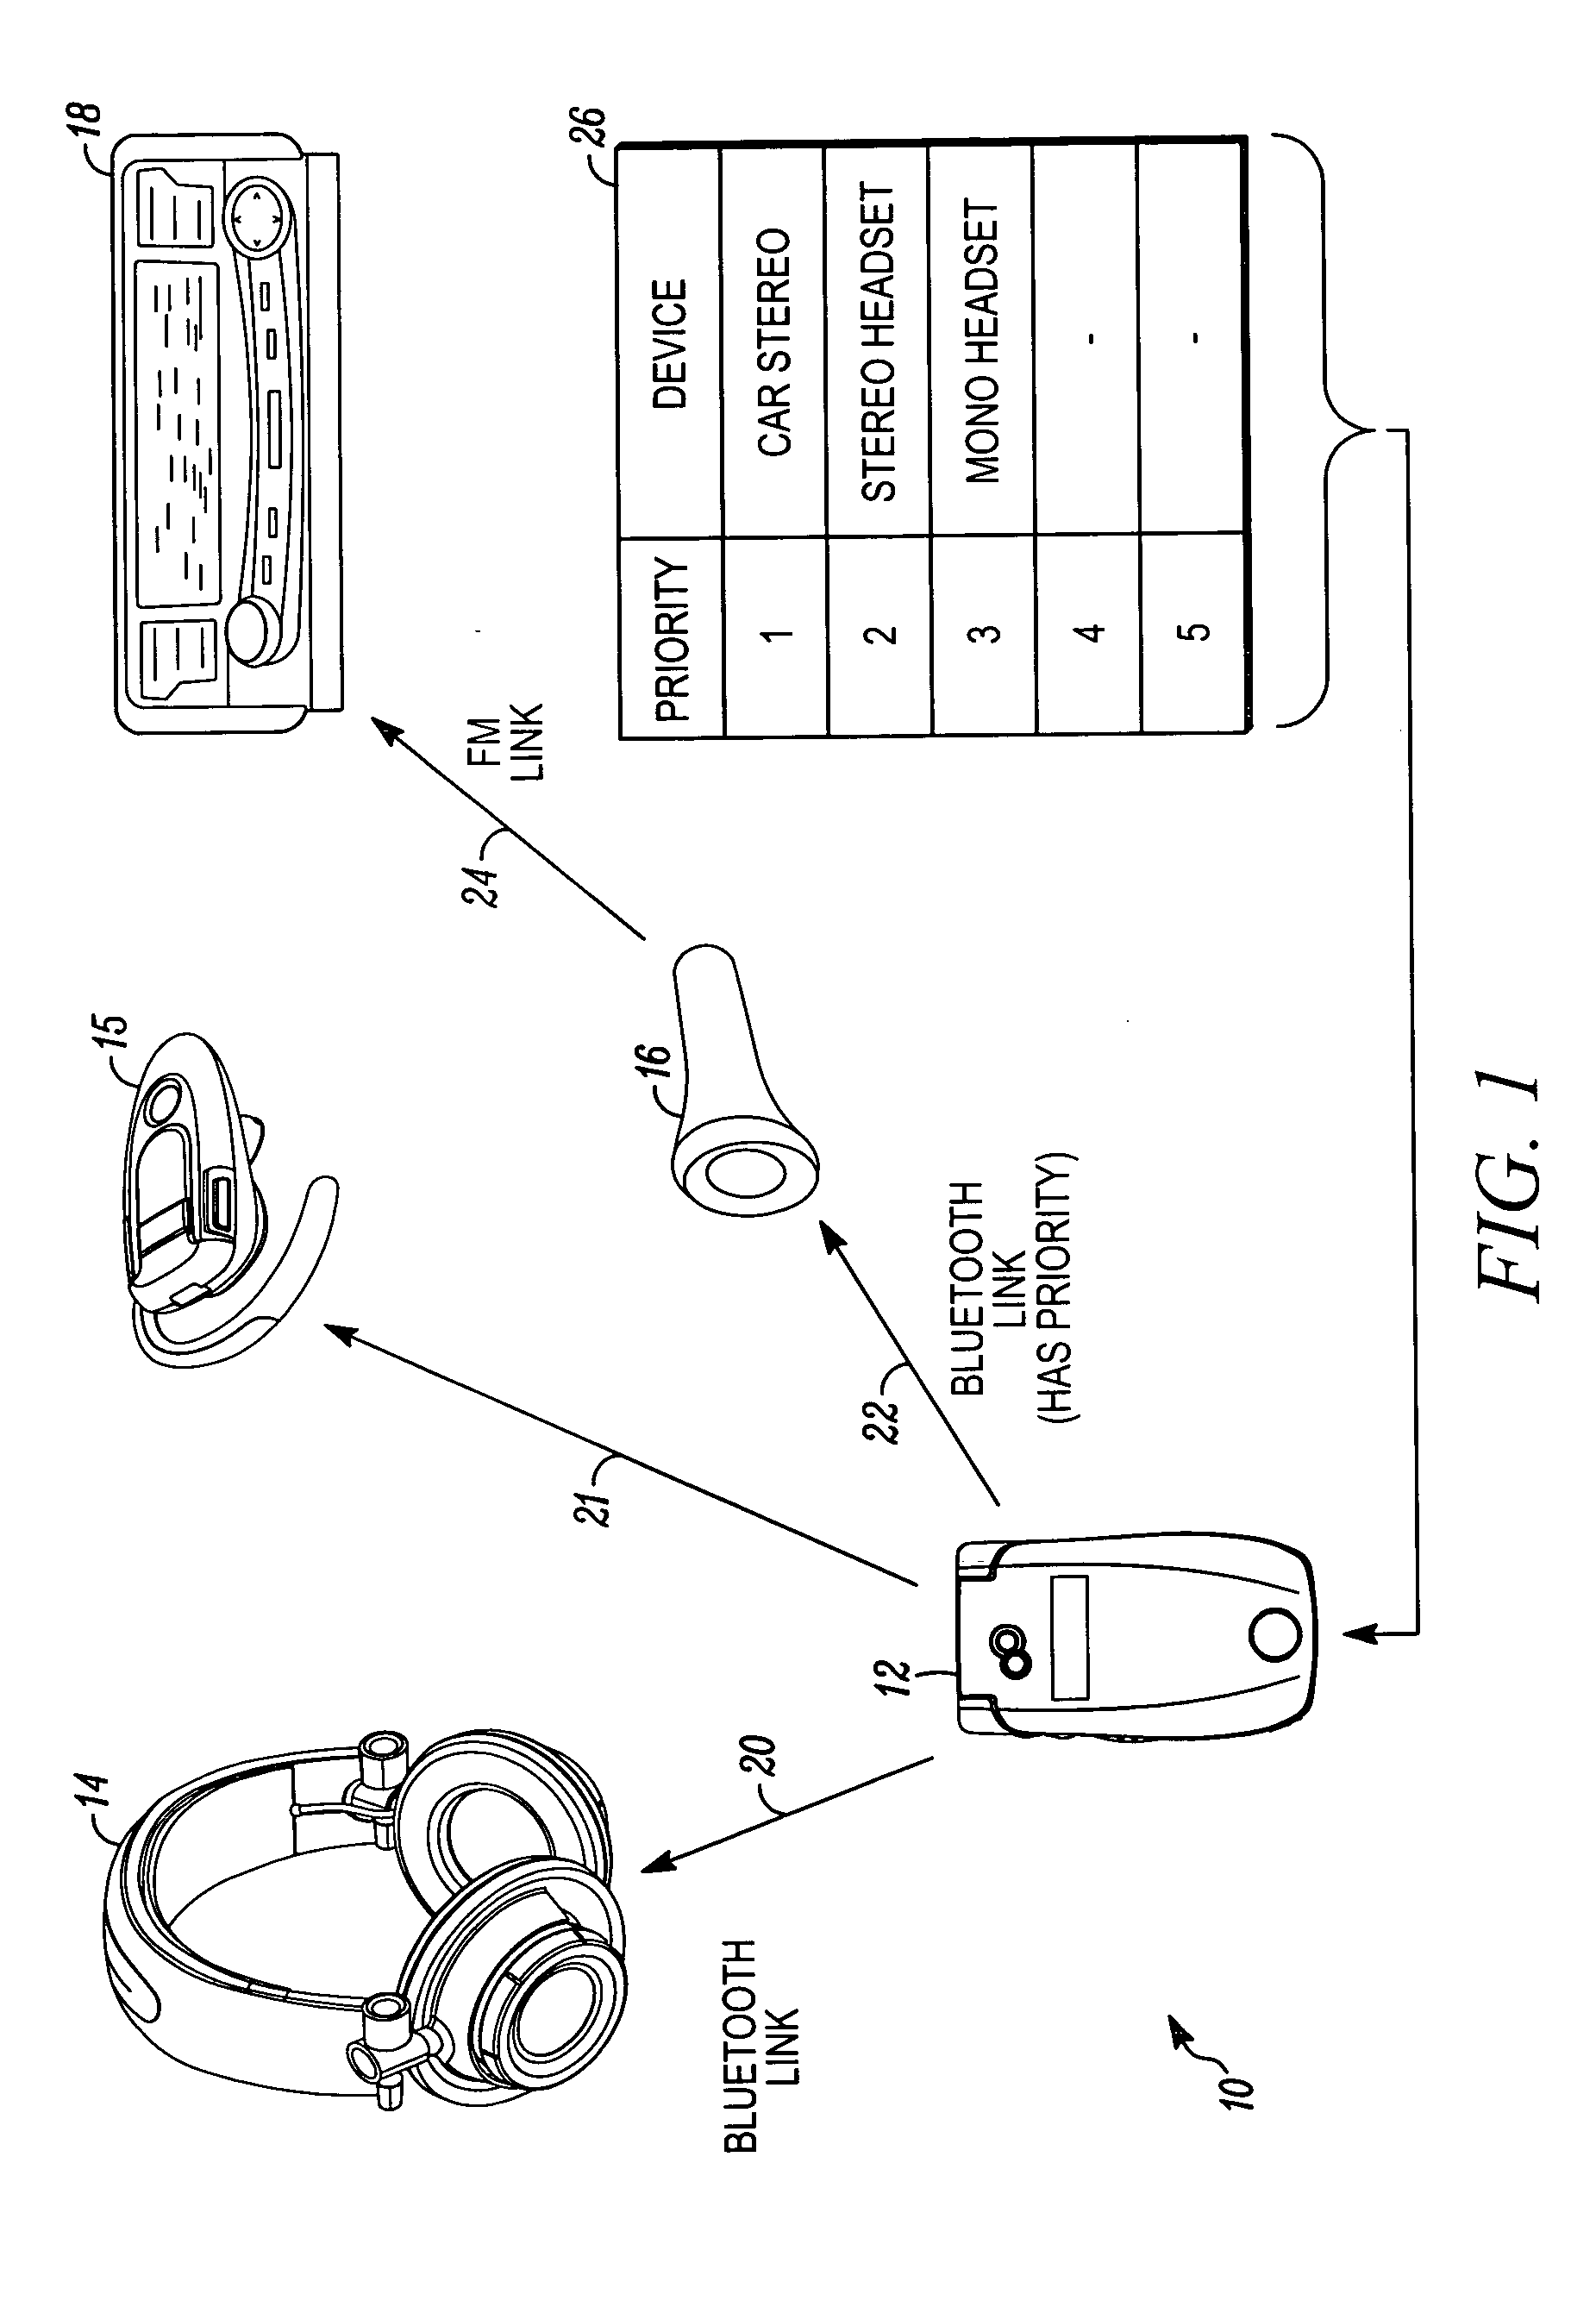 Wireless communications device with priority list